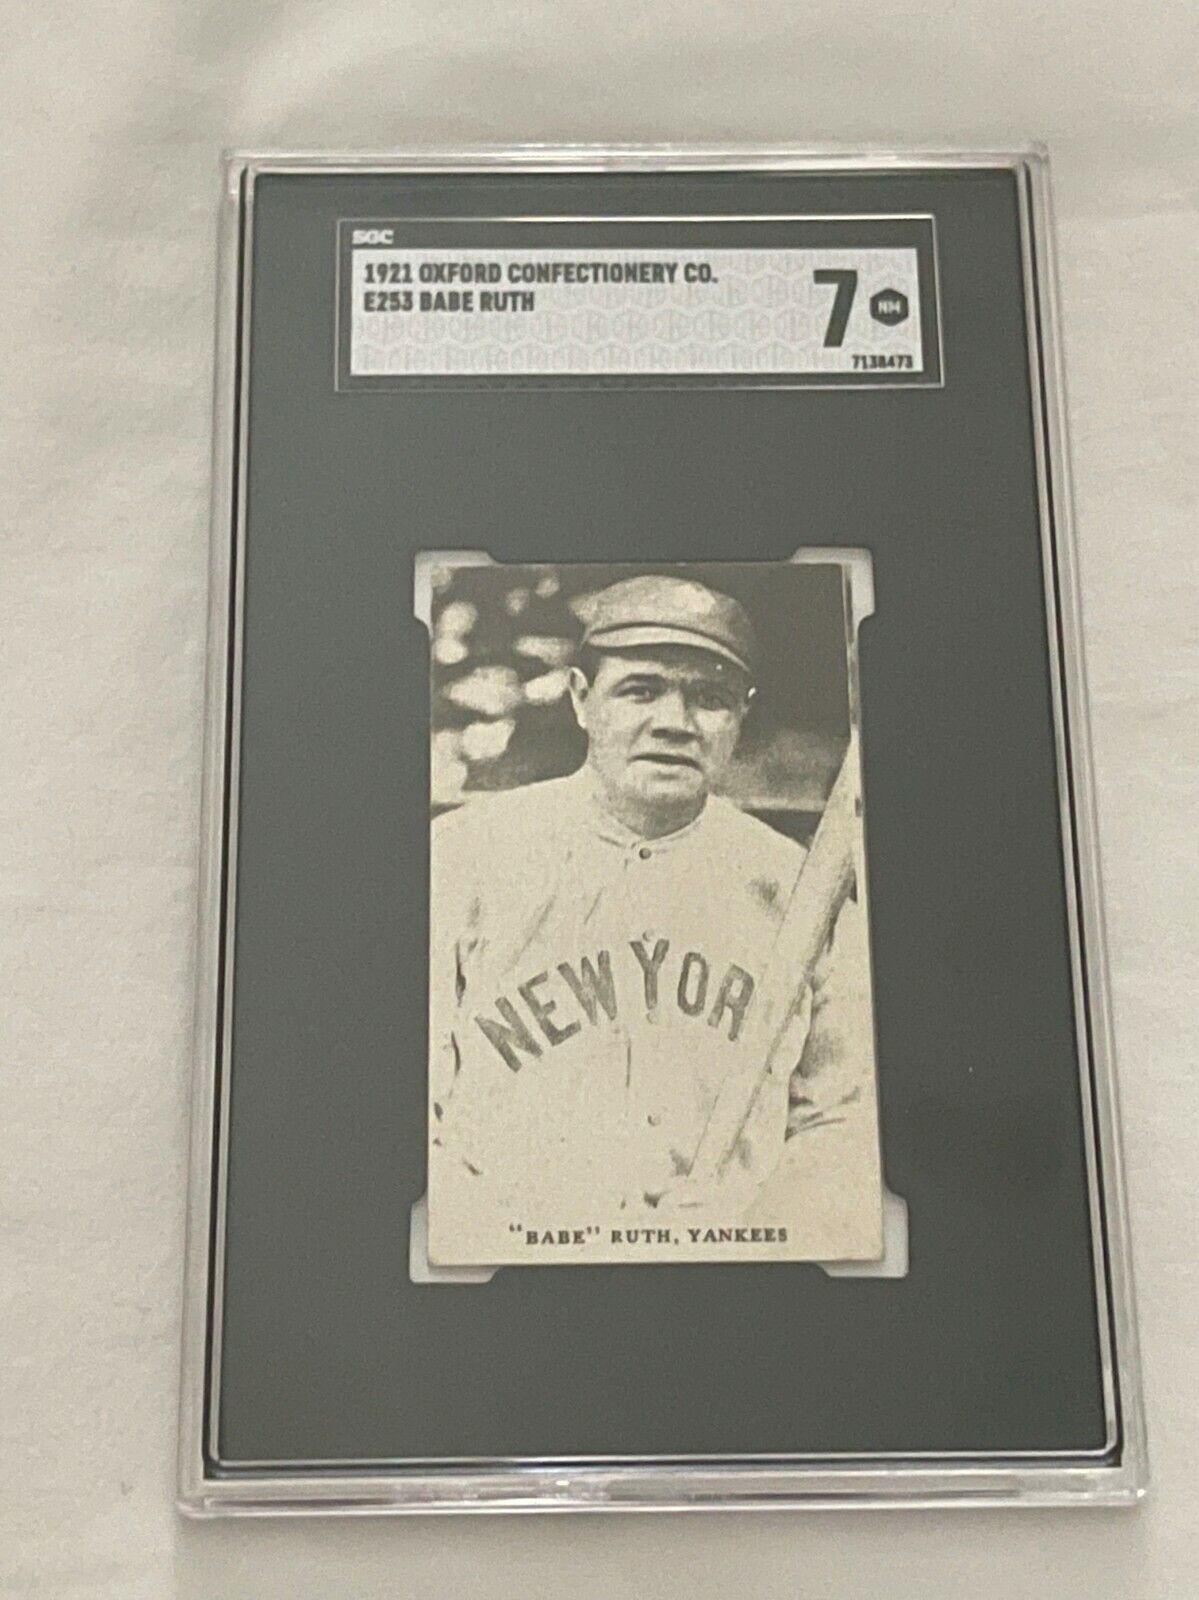 Babe Ruth Card 1921 - Highest Graded Card in the World